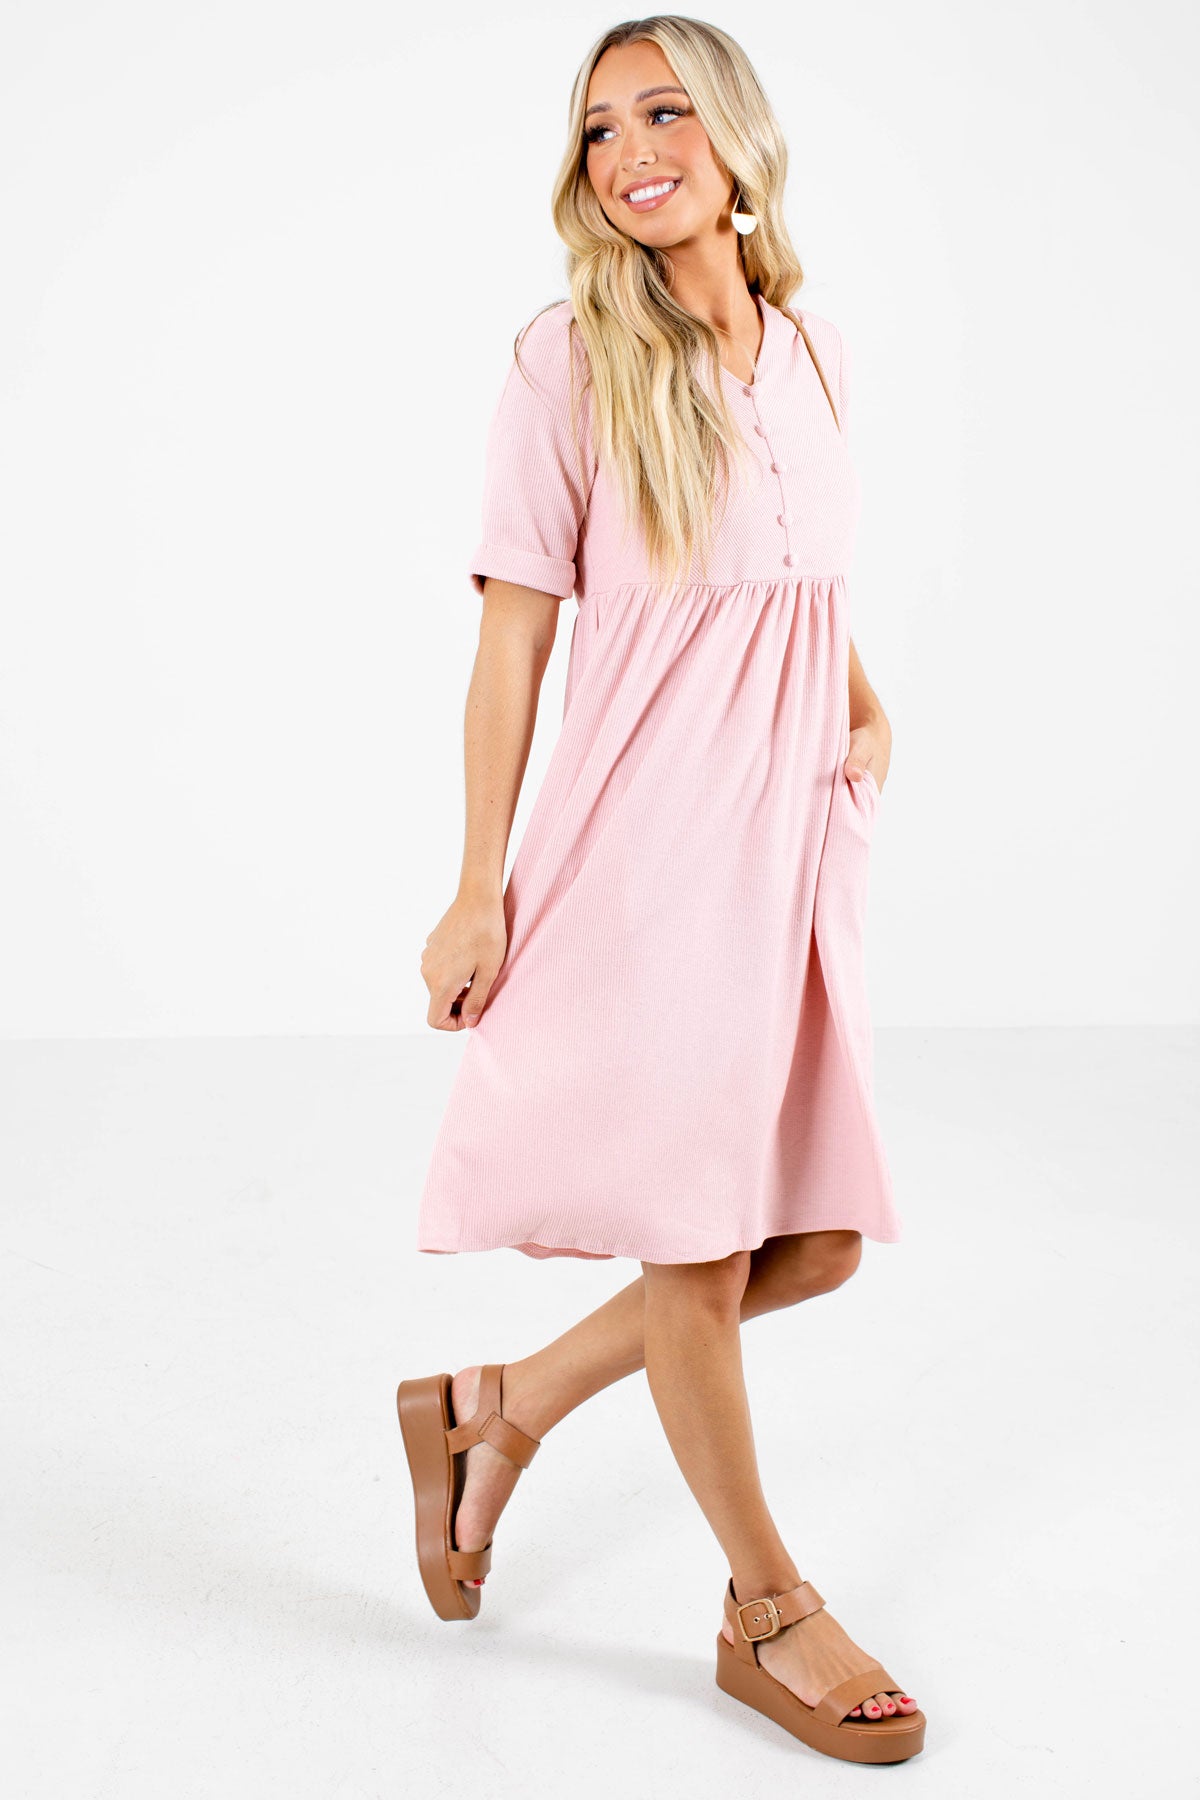 Women's Pink Casual Everyday Boutique Knee-Length Dress